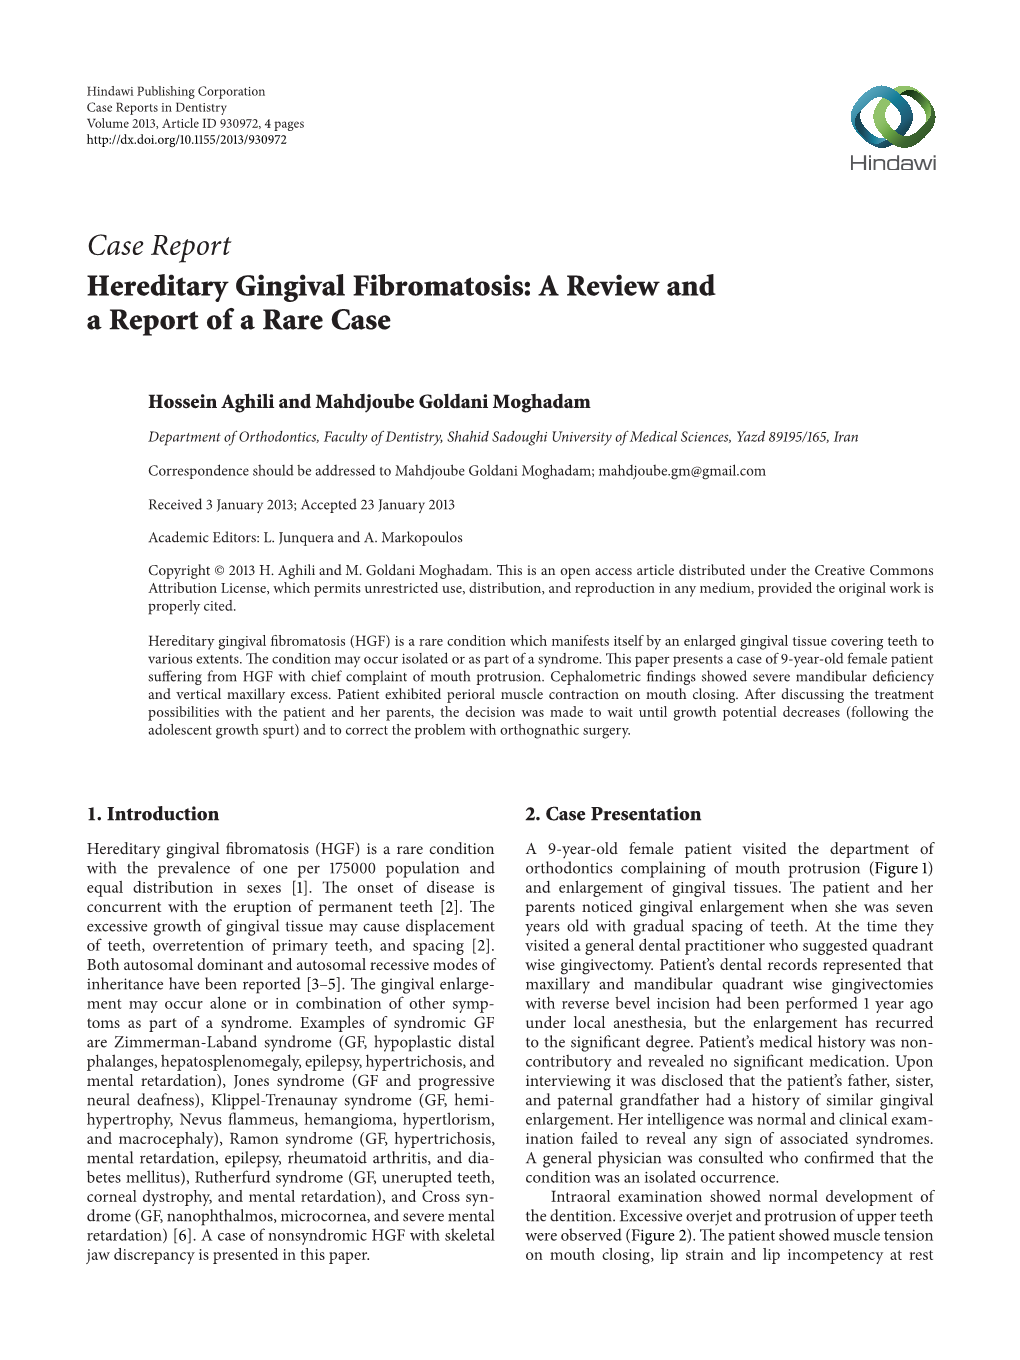 Hereditary Gingival Fibromatosis: a Review and a Report of a Rare Case